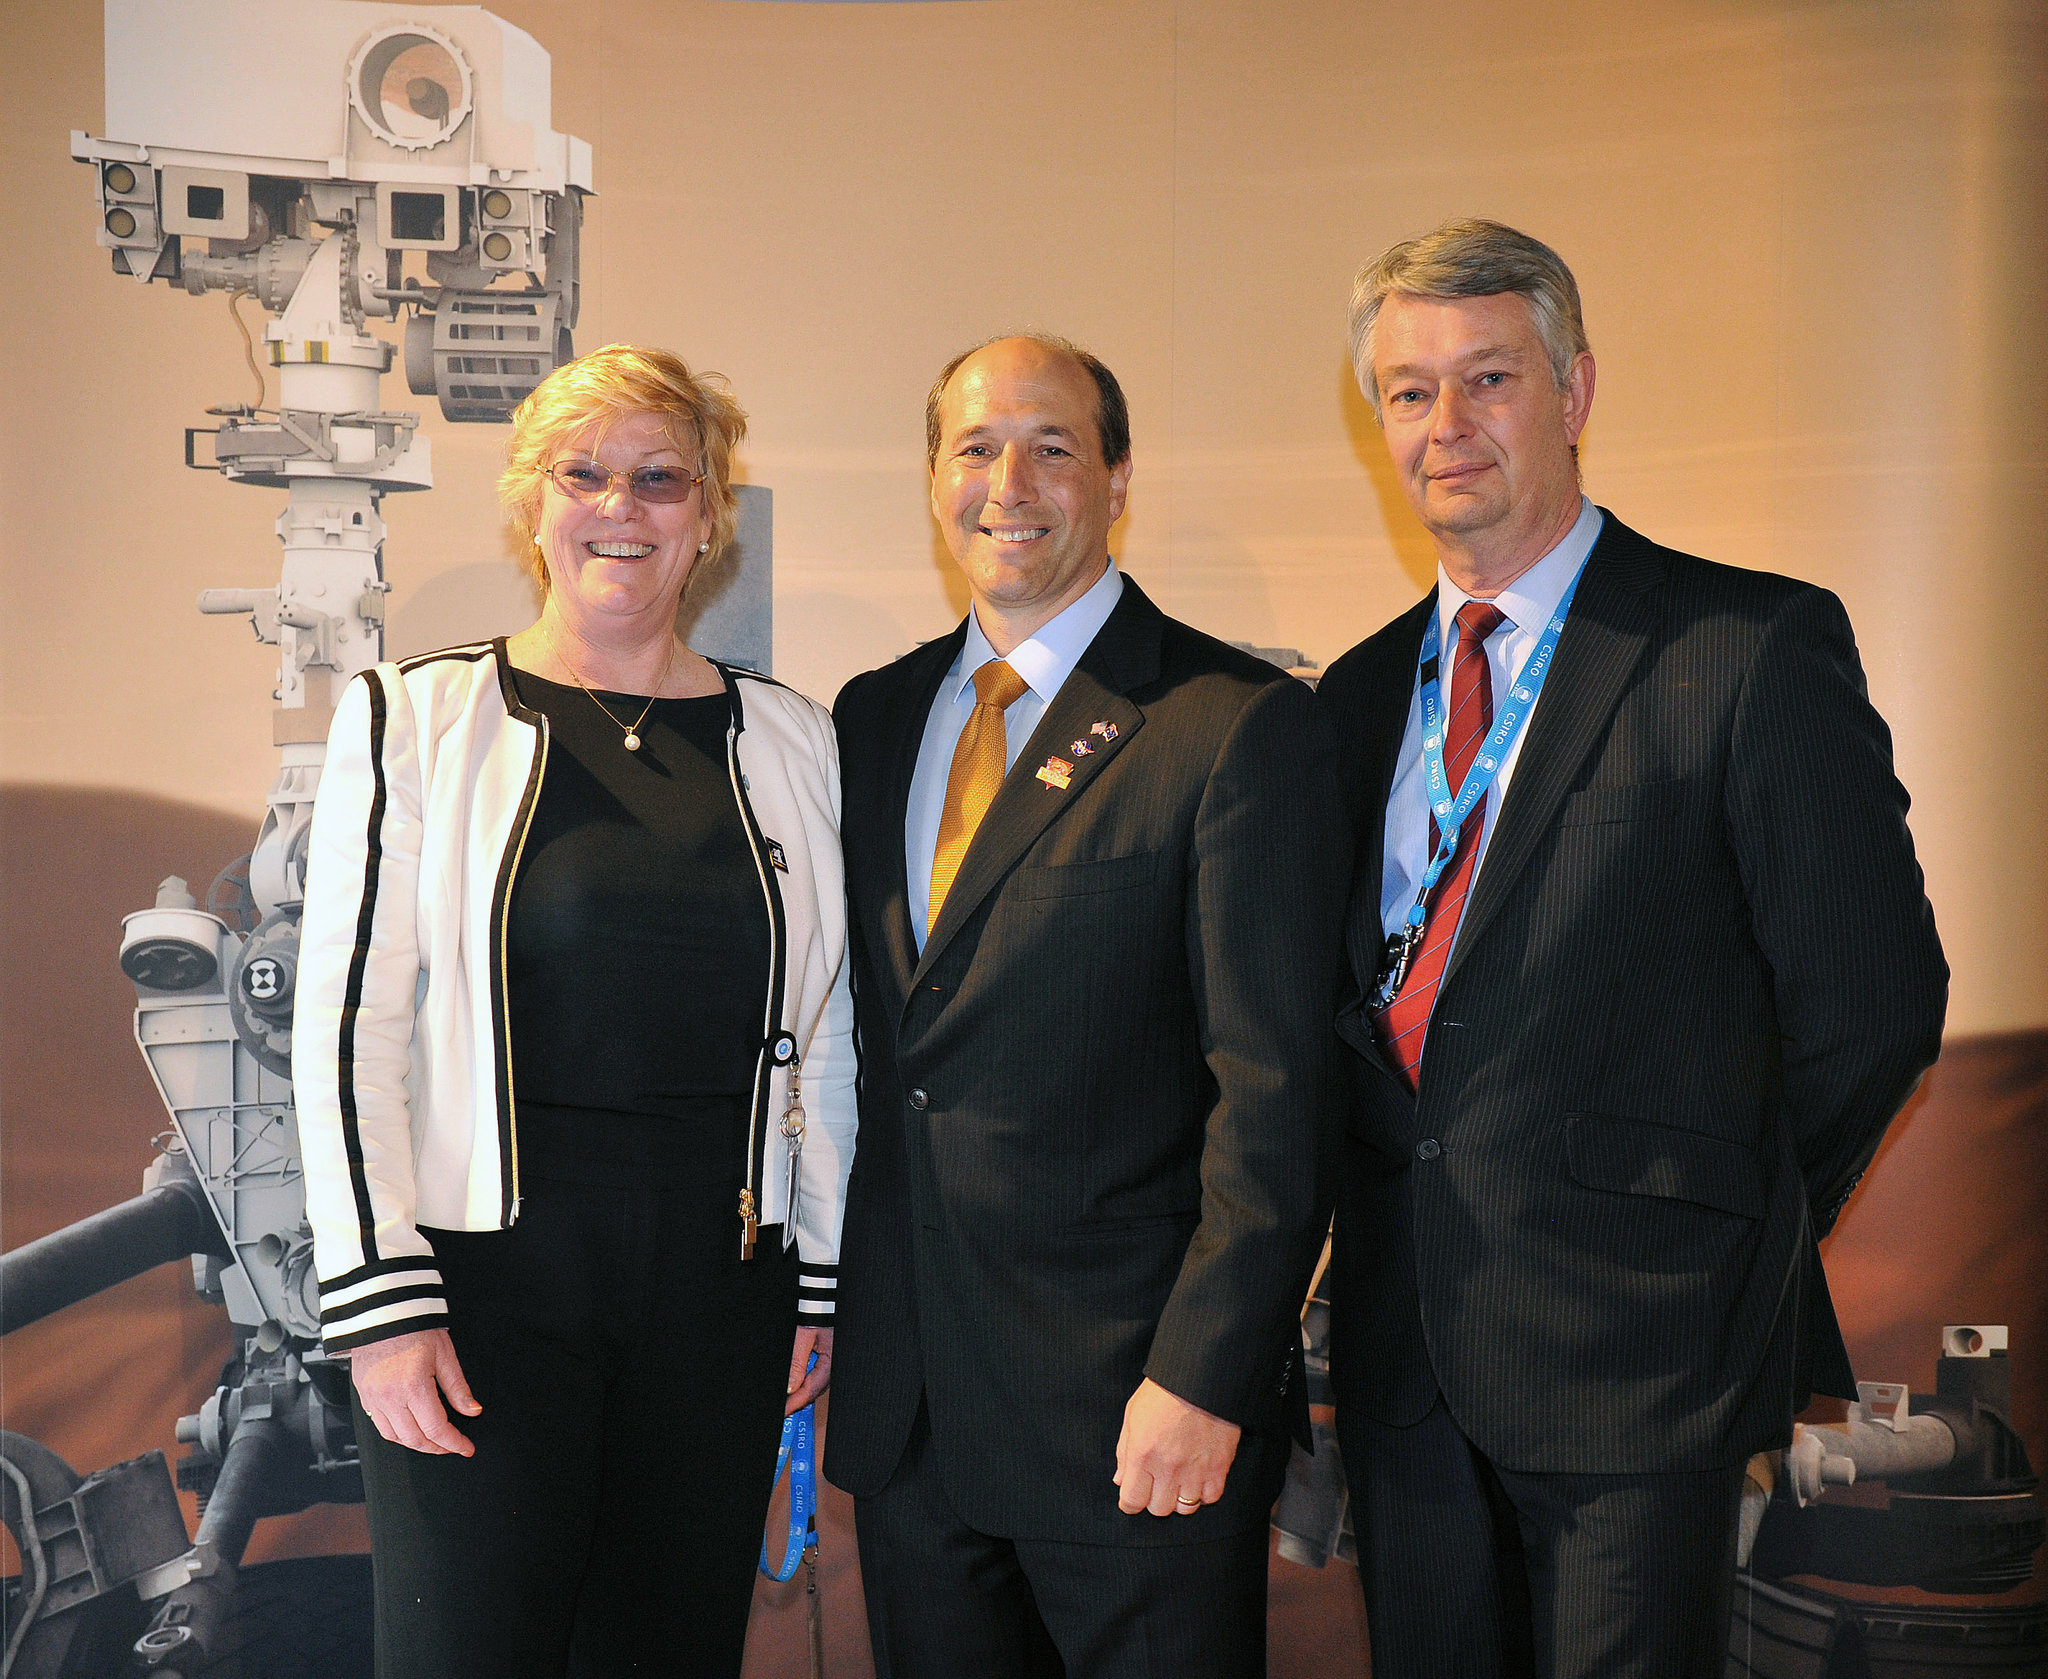 Megan Clark at the Deep Space Communication Complex in Canberra in 2012 with his director, Ed Kruzins, and then US Ambassador Jeffrey L. Bleich.